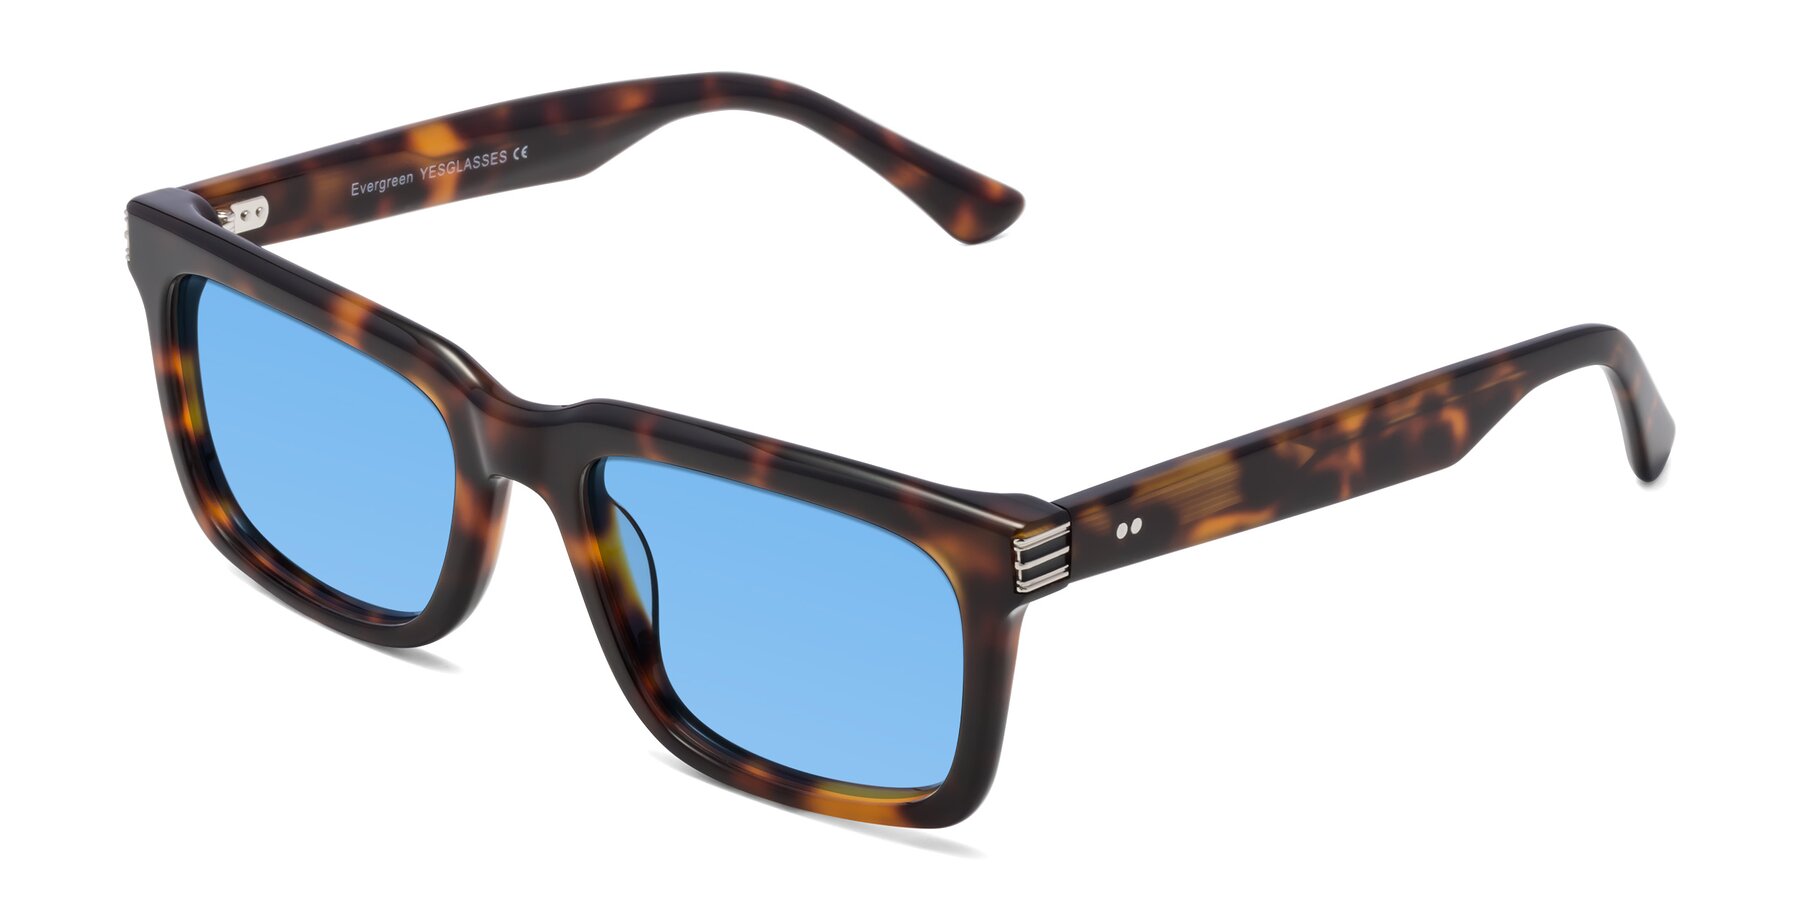 Angle of Evergreen in Tortoise with Medium Blue Tinted Lenses